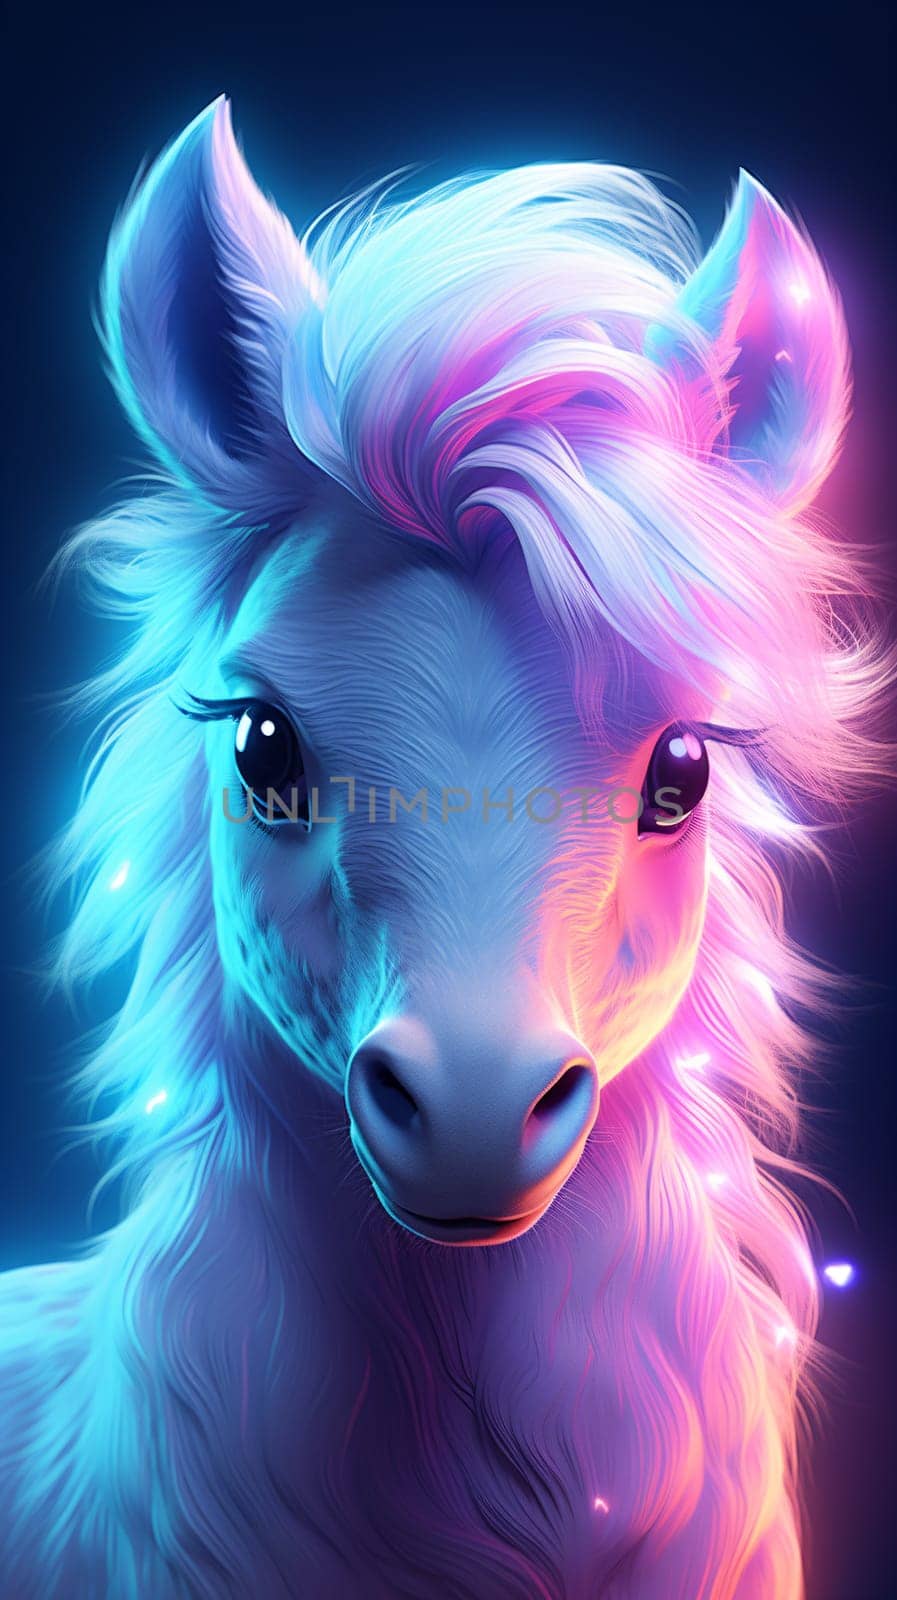 Digital art of a horse with vibrant neon mane in a fantasy style